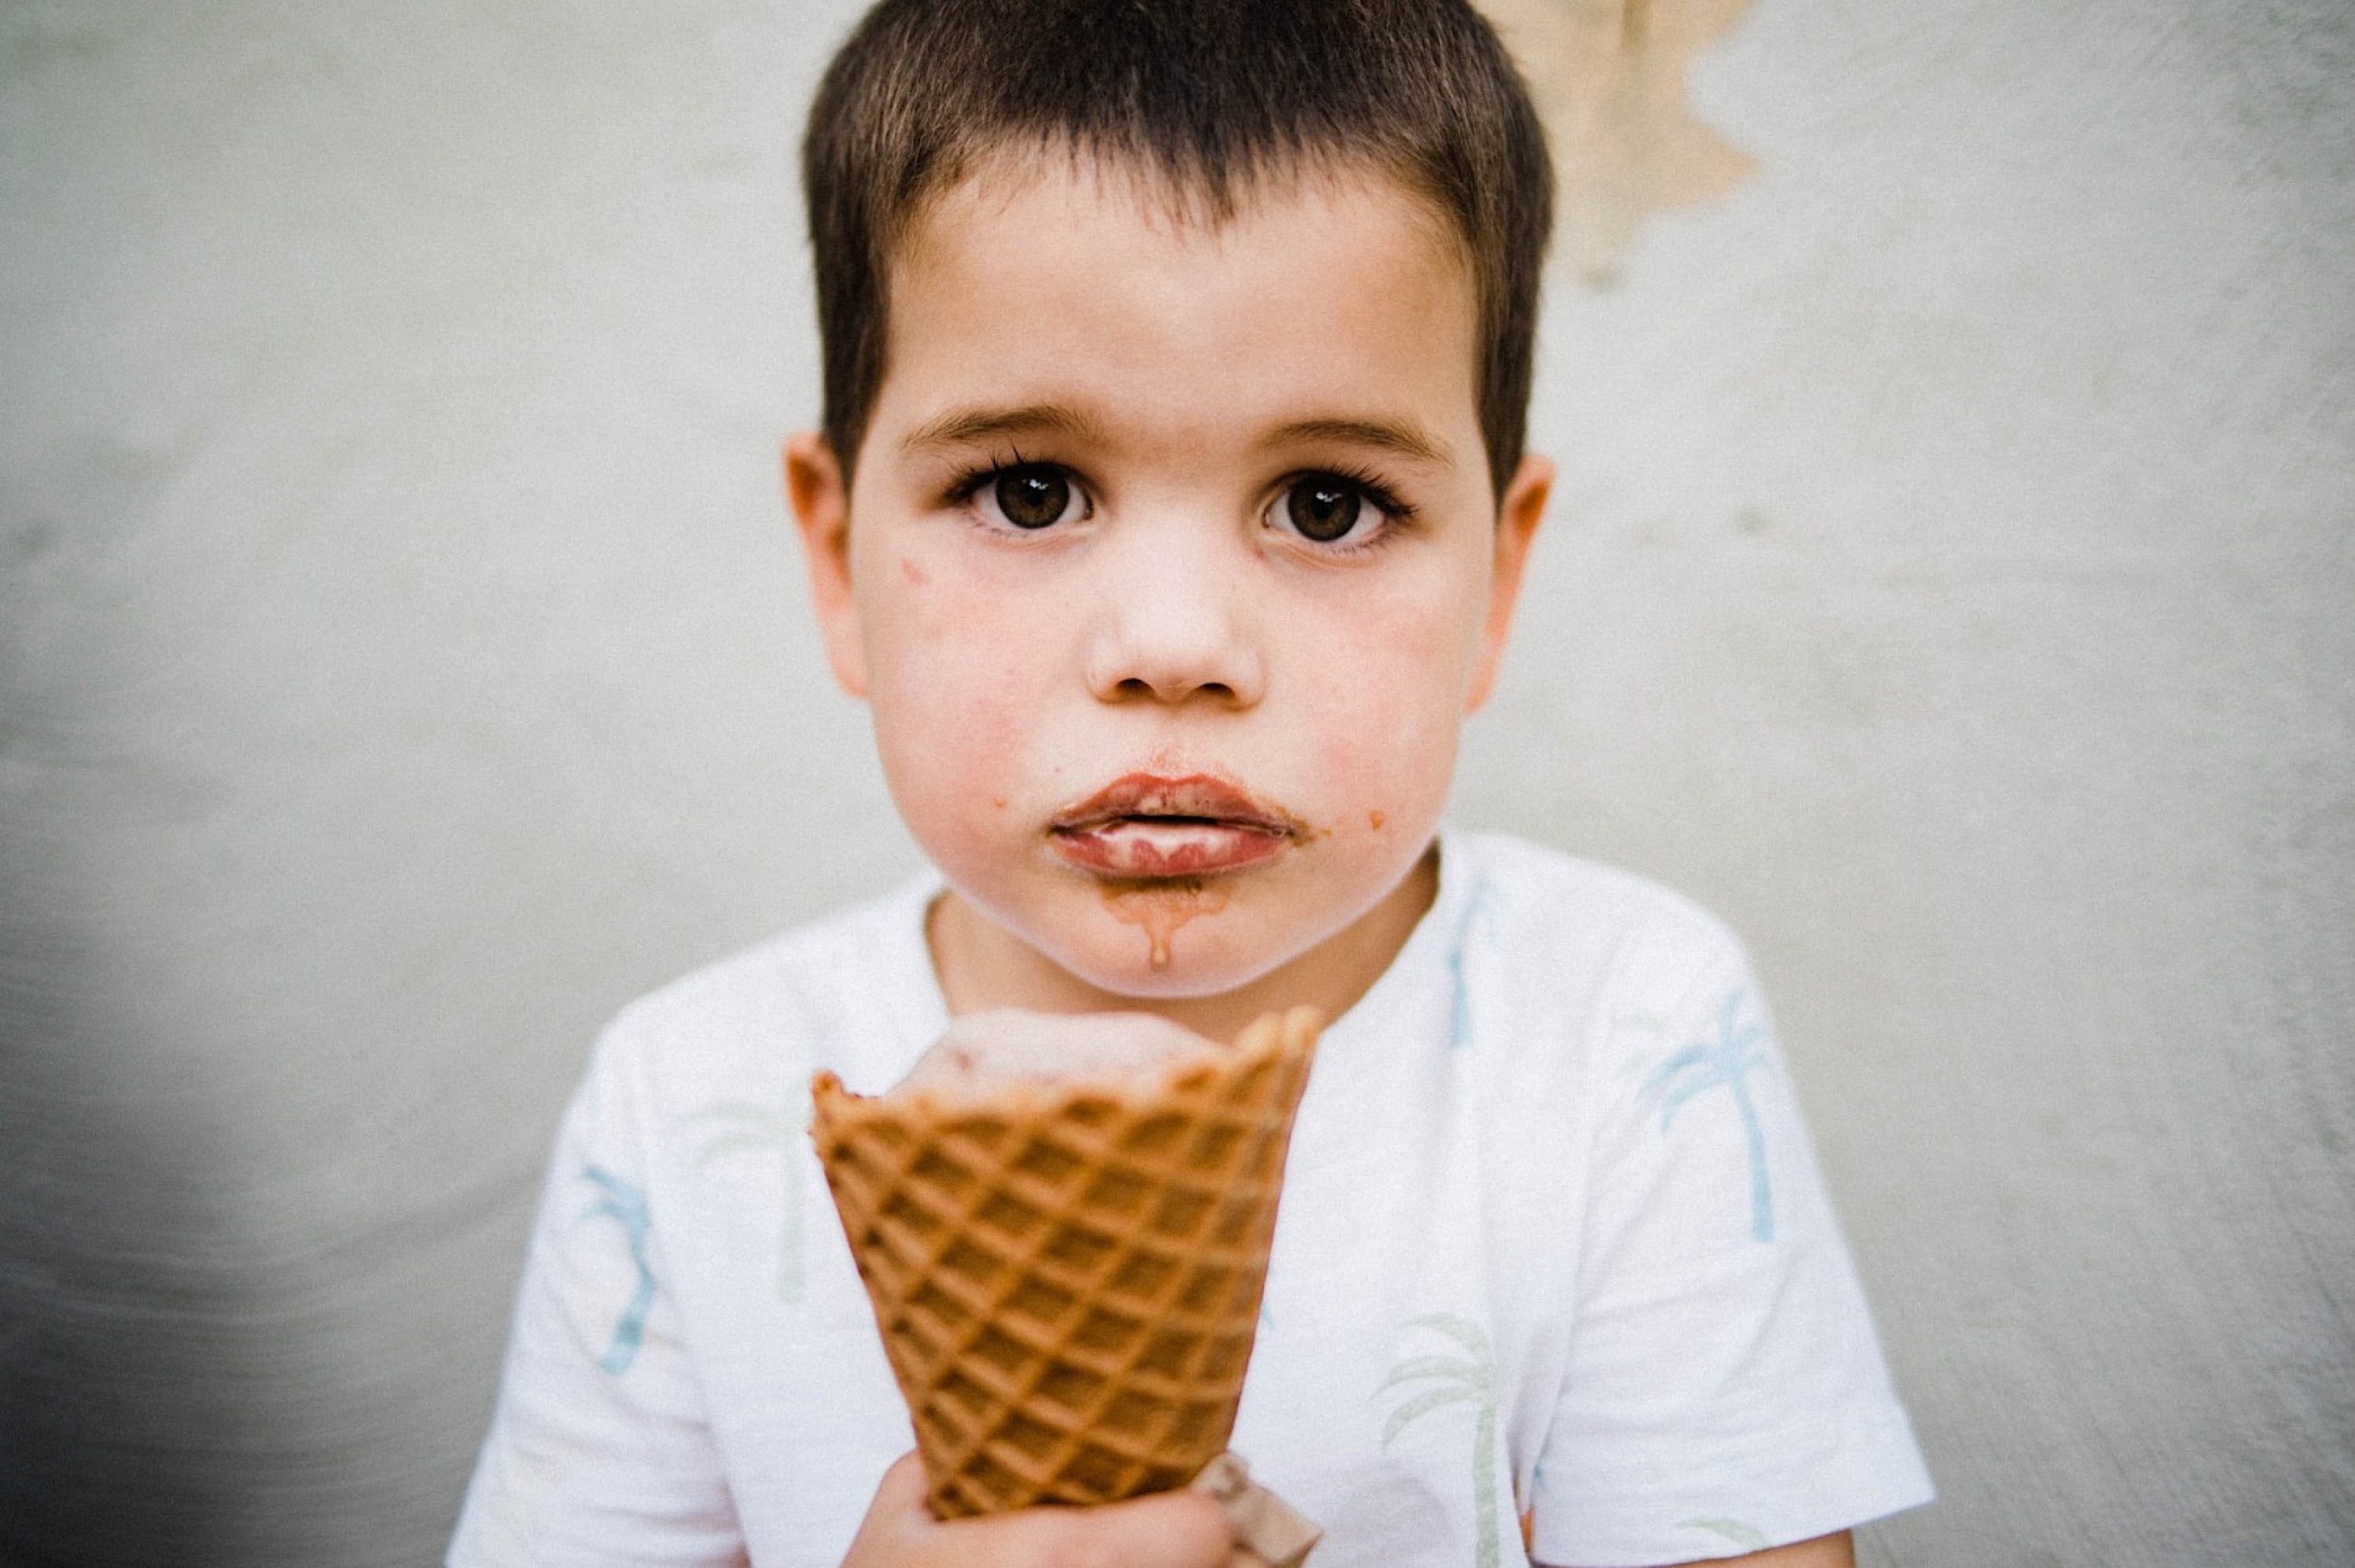 A close-up portrait of a young boy looking seriously at the camera, holding an ice cream cone, with ice cream on his lips and melting down his chin.